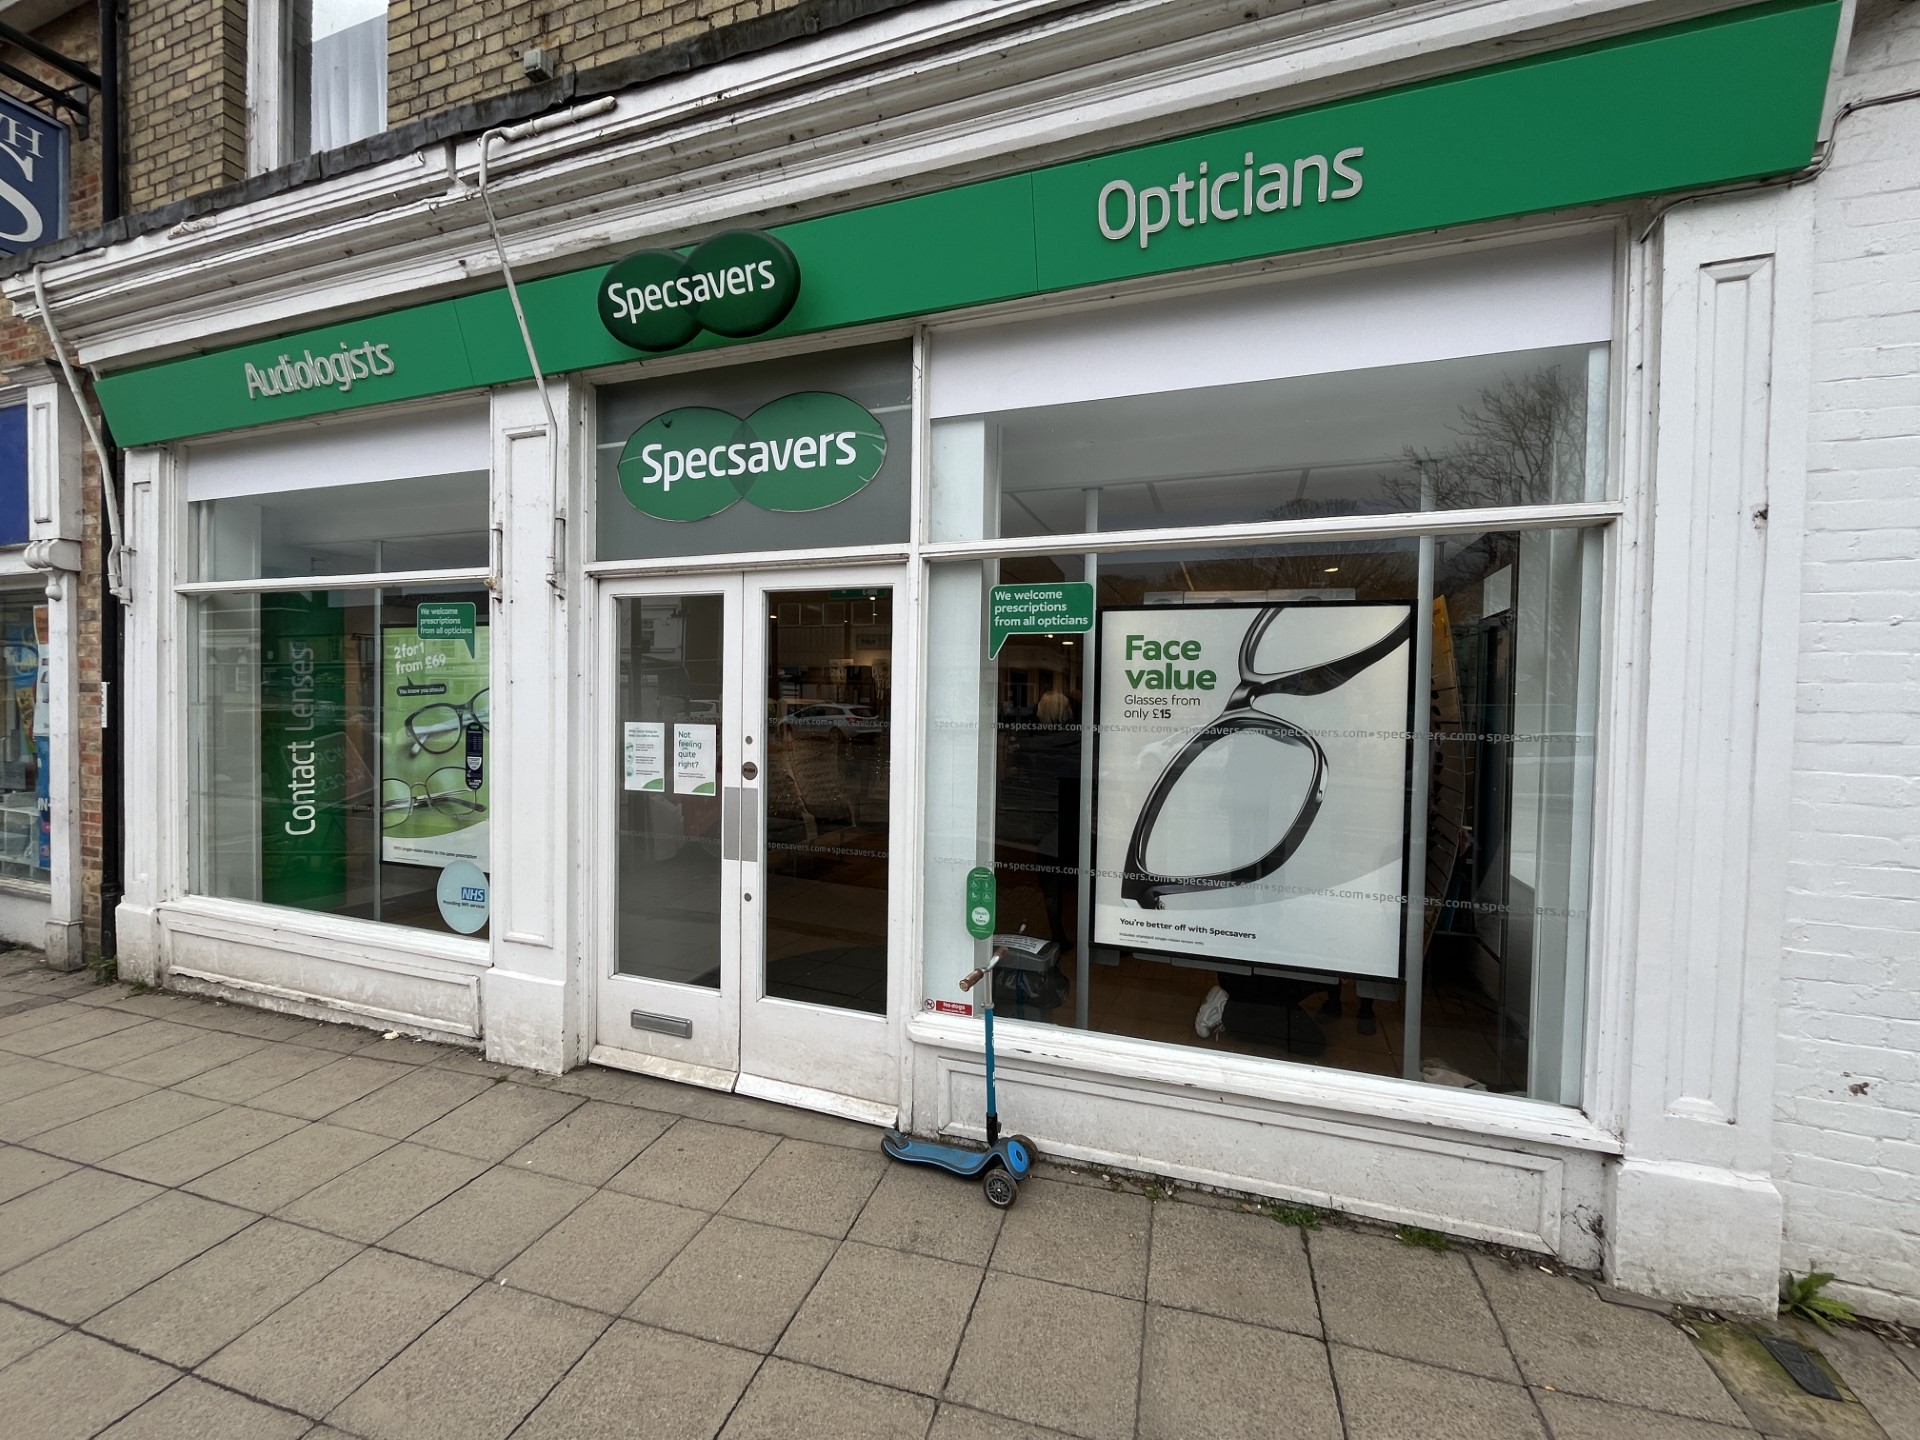 Images Specsavers Opticians and Audiologists - March